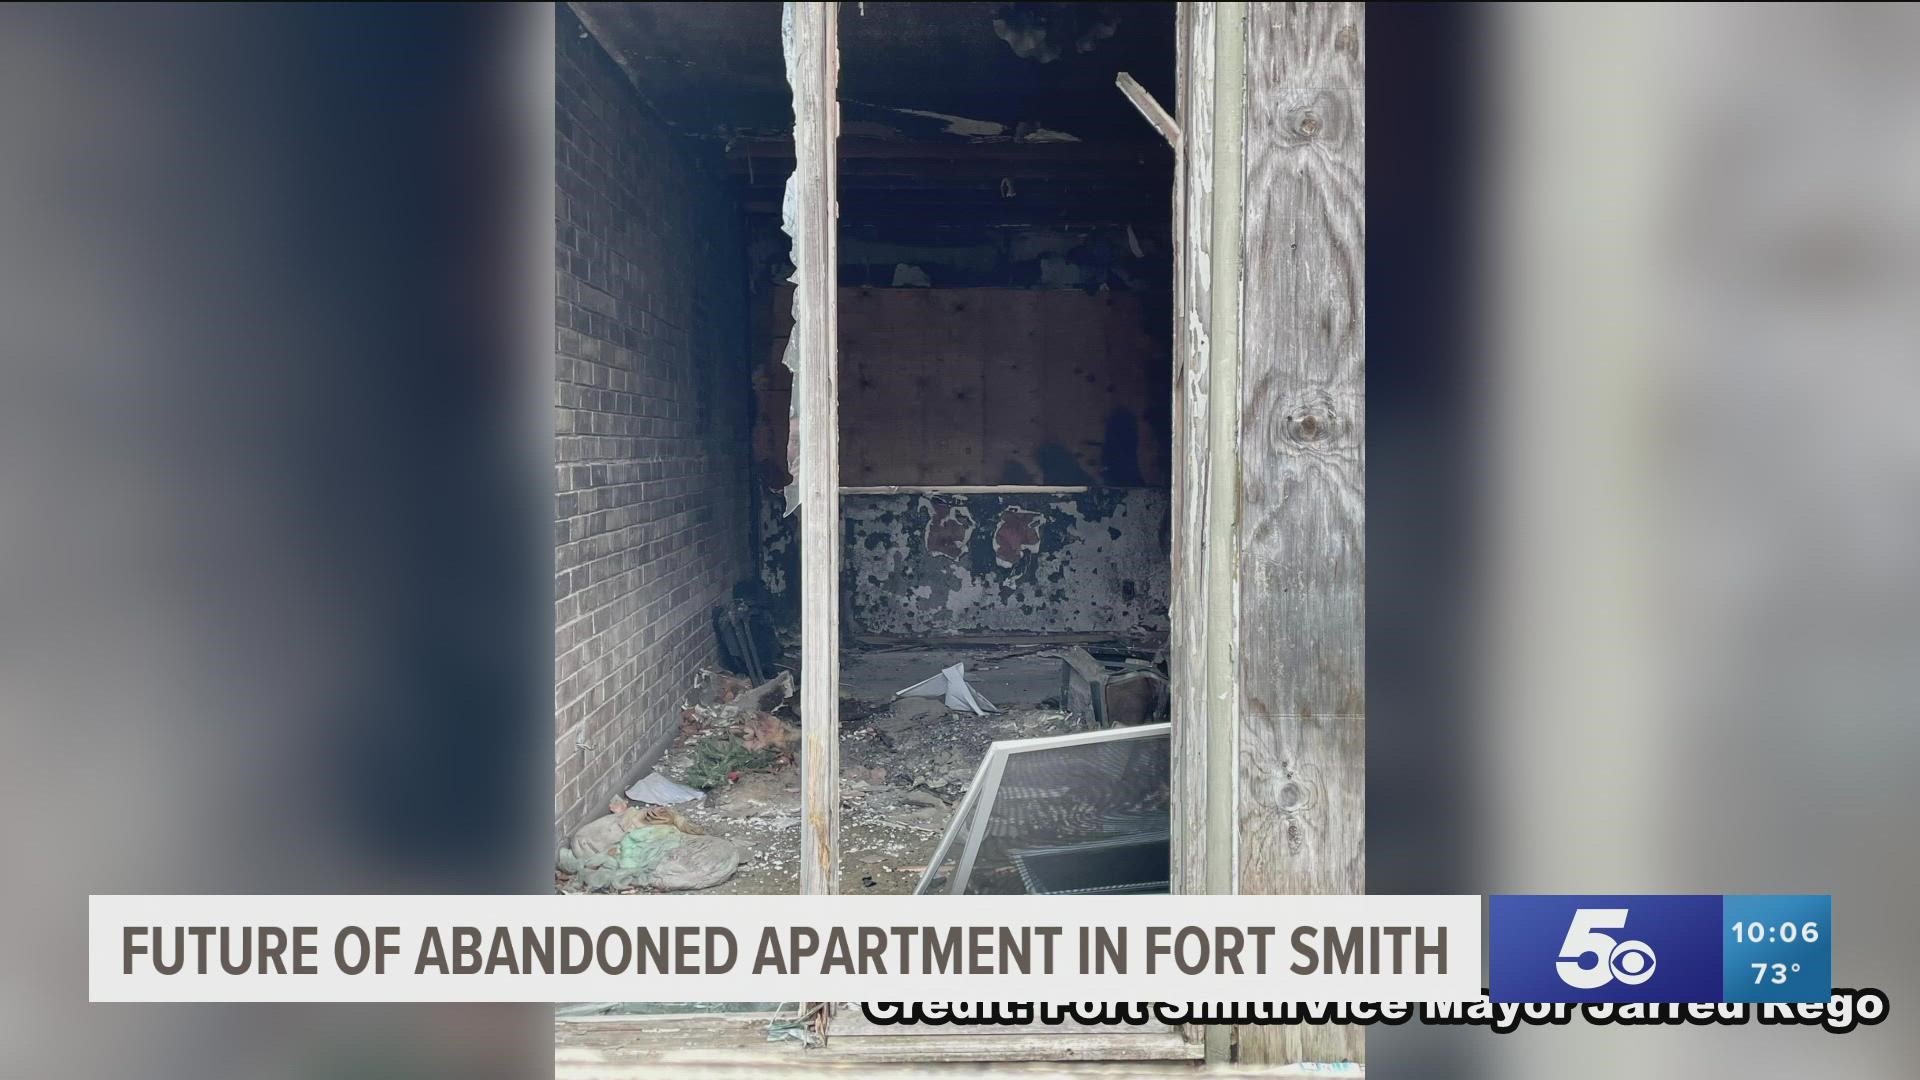 The Fort Smith Board of Directors met to discuss the future of an abandoned apartment complex in the area.